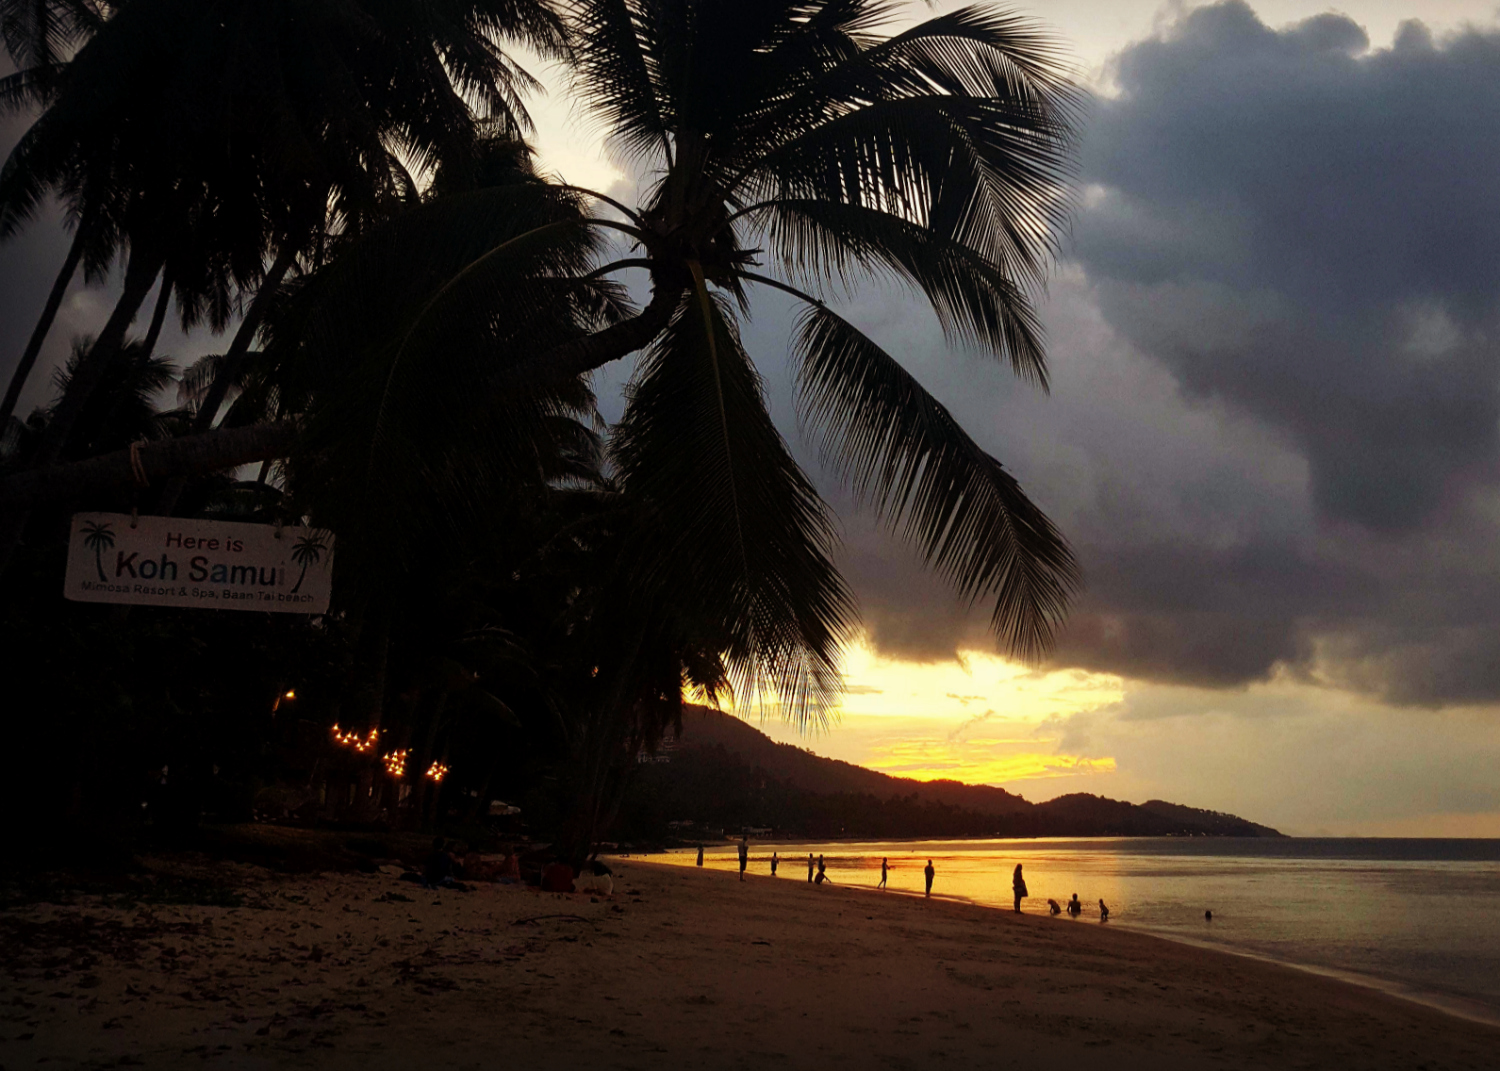 Bypassing backpackers and kicking back in Koh Samui